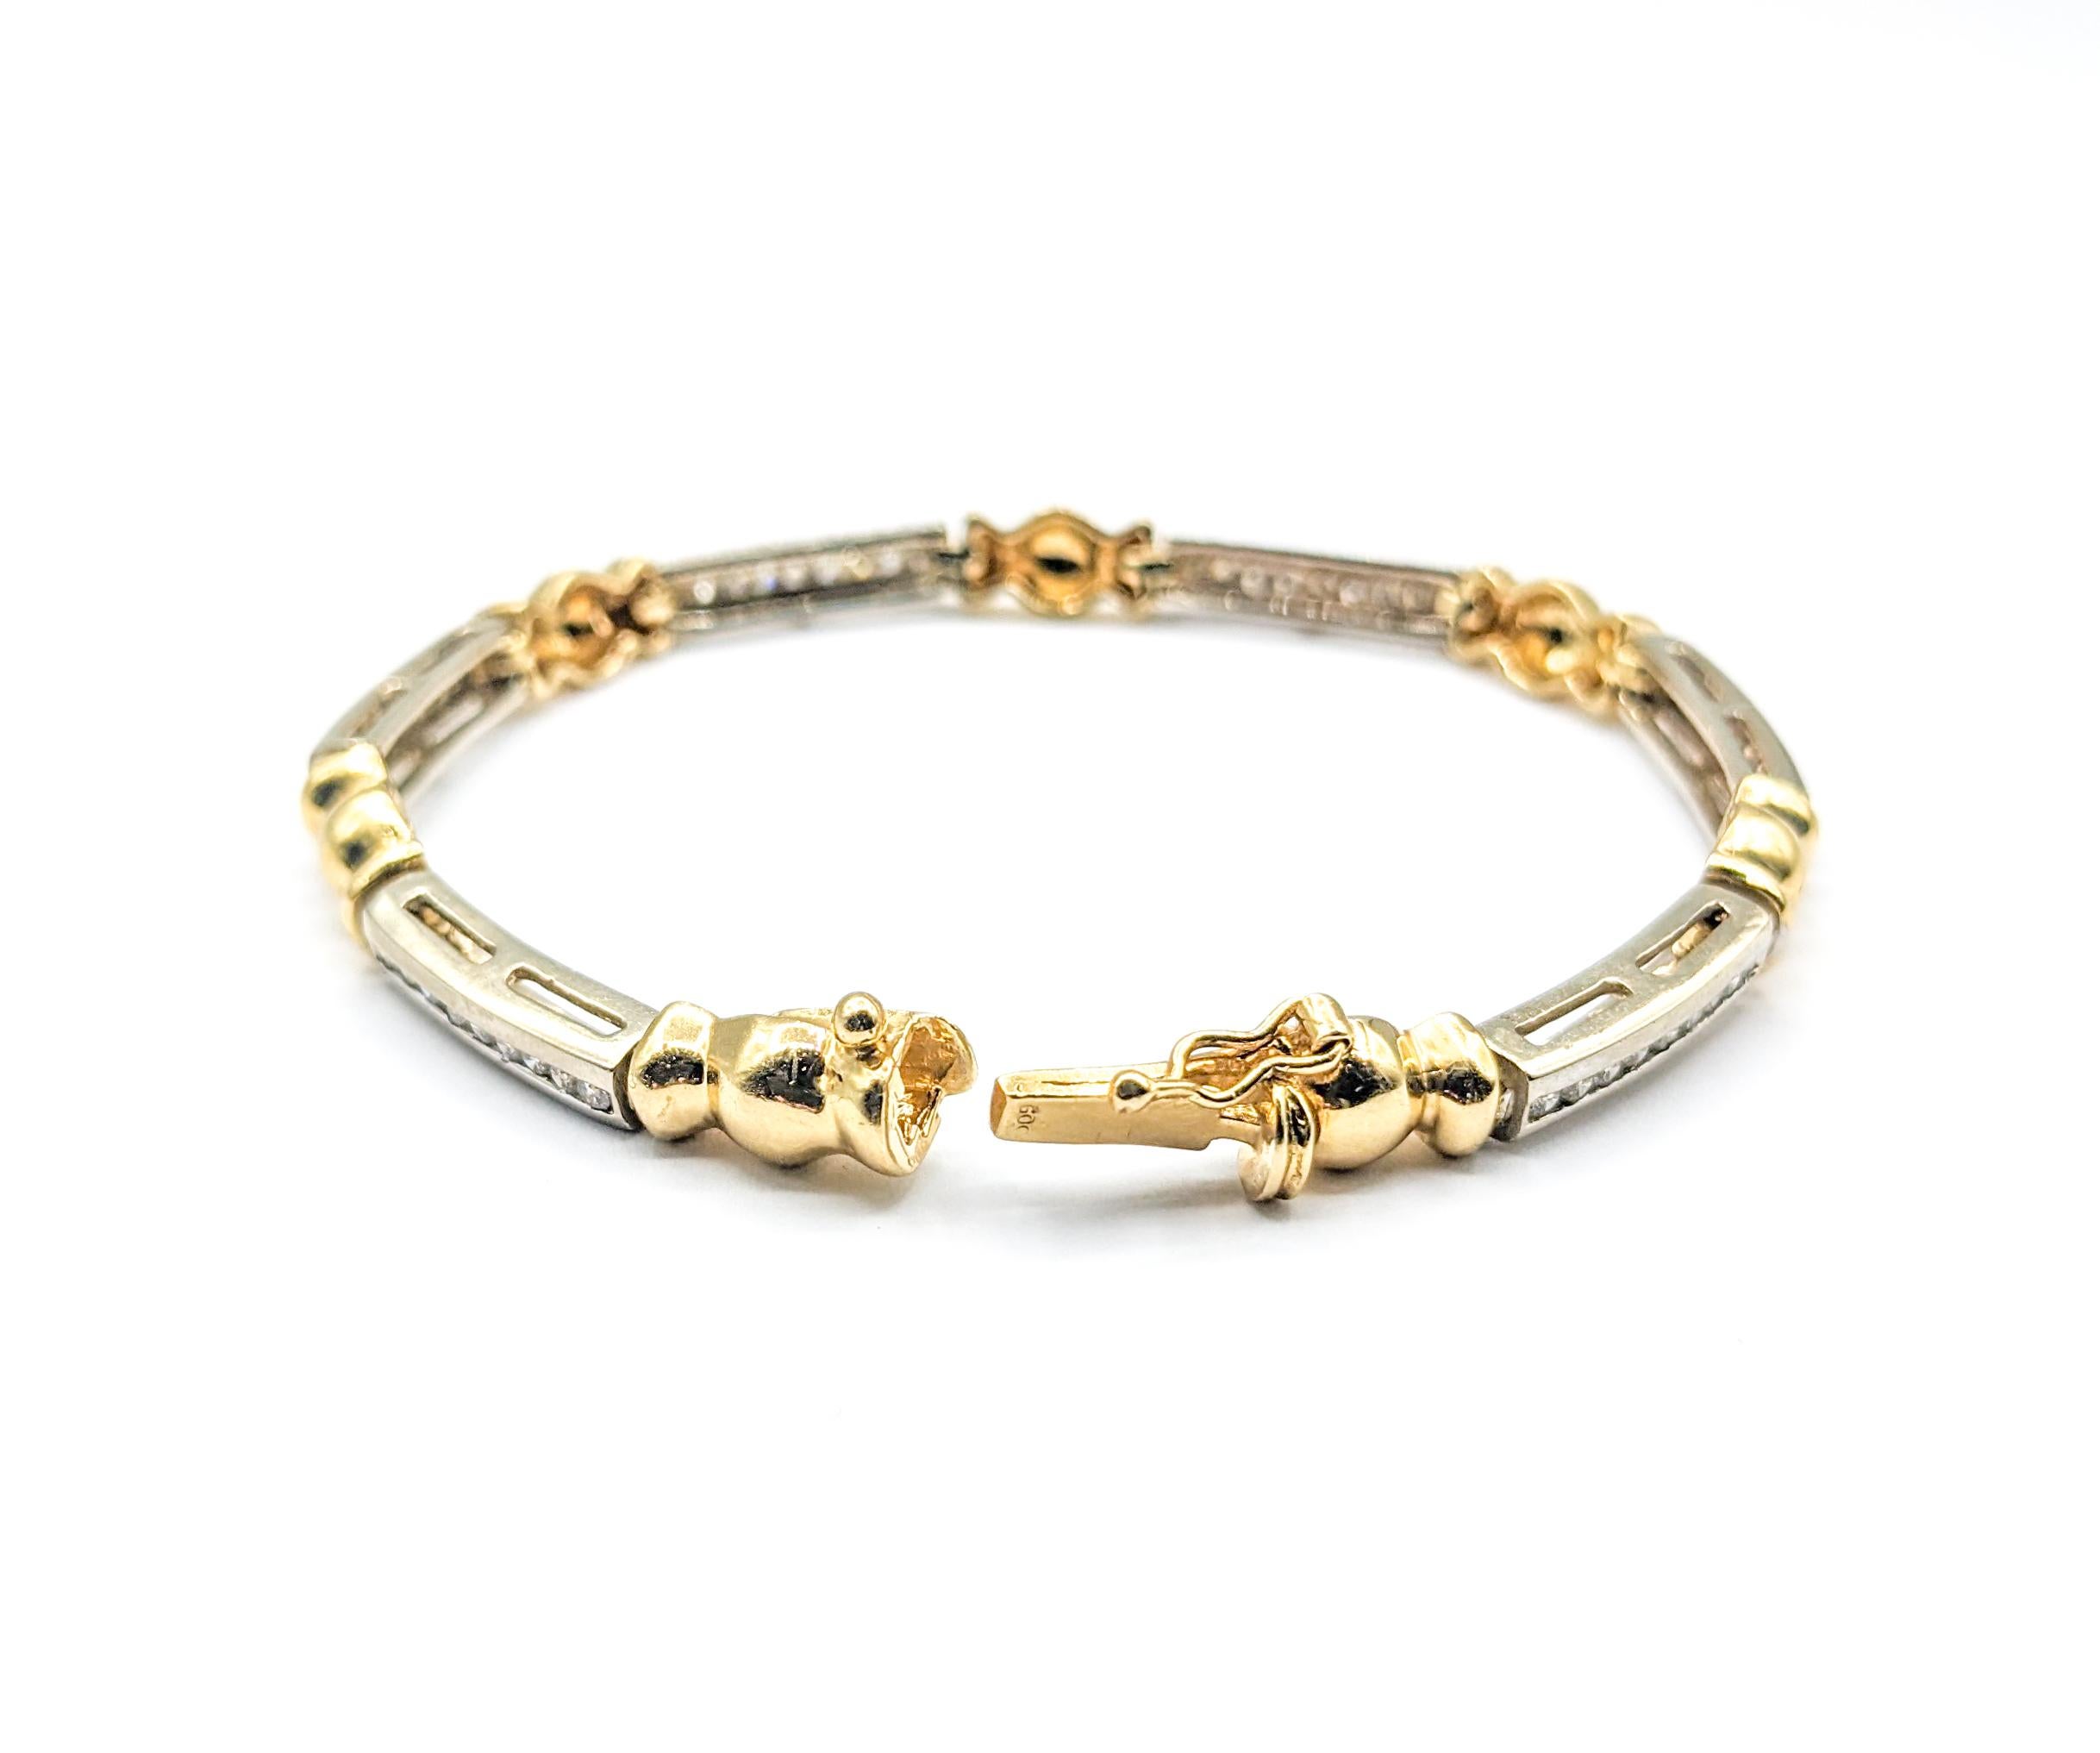 Modern Unique Bar and Ball Design Bracelet In Two-Tone Gold For Sale